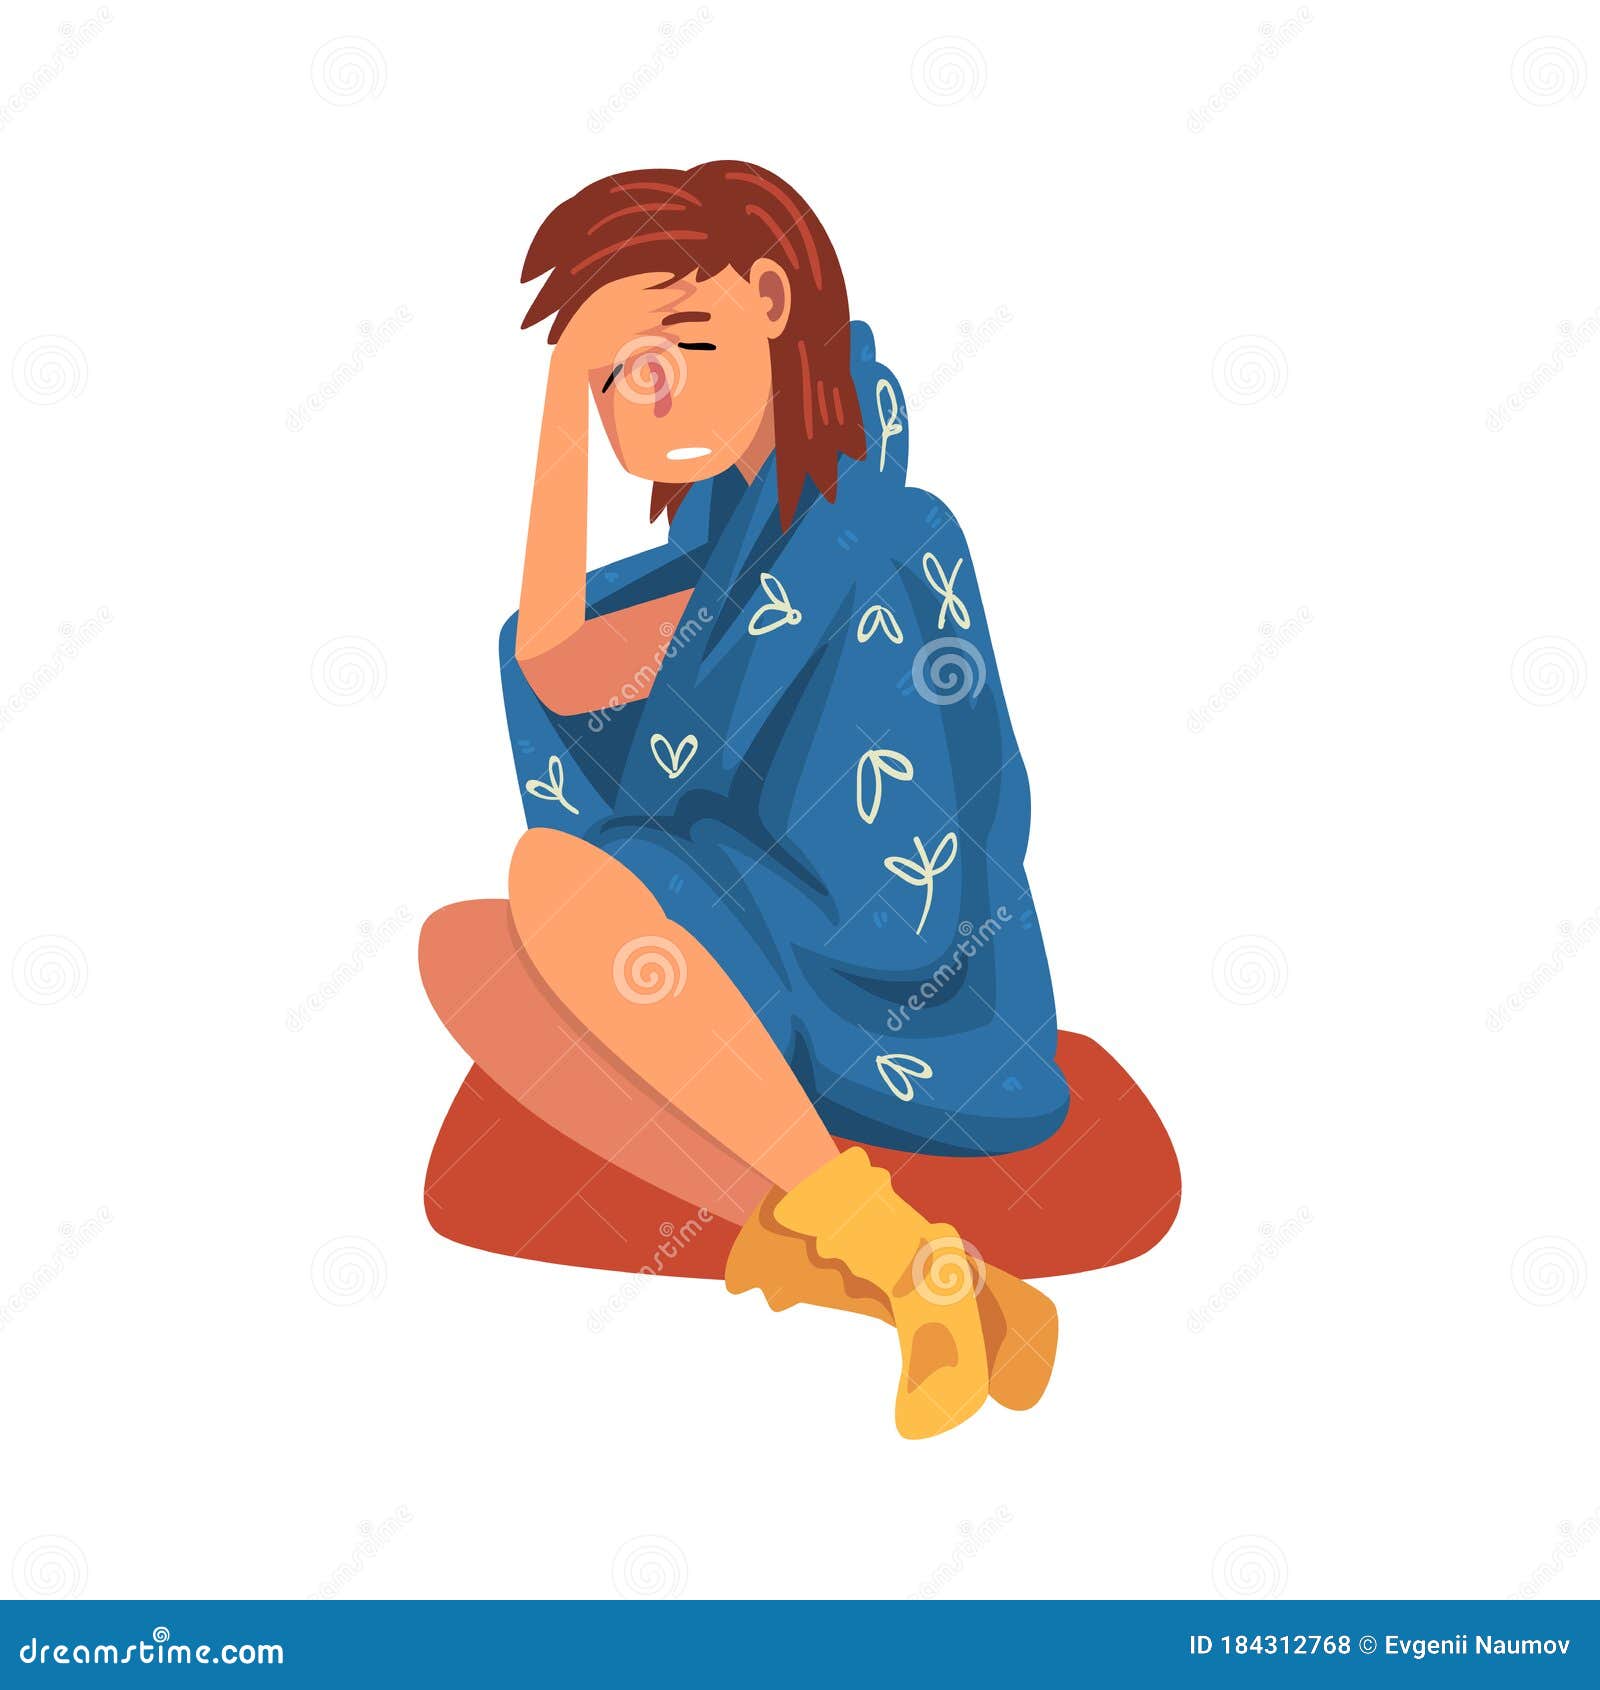 Sick Young Woman Wrapped in Plaid, Girl with Flu Having Headache Cartoon  Vector Illustration Stock Vector - Illustration of medical, healthcare:  184312768